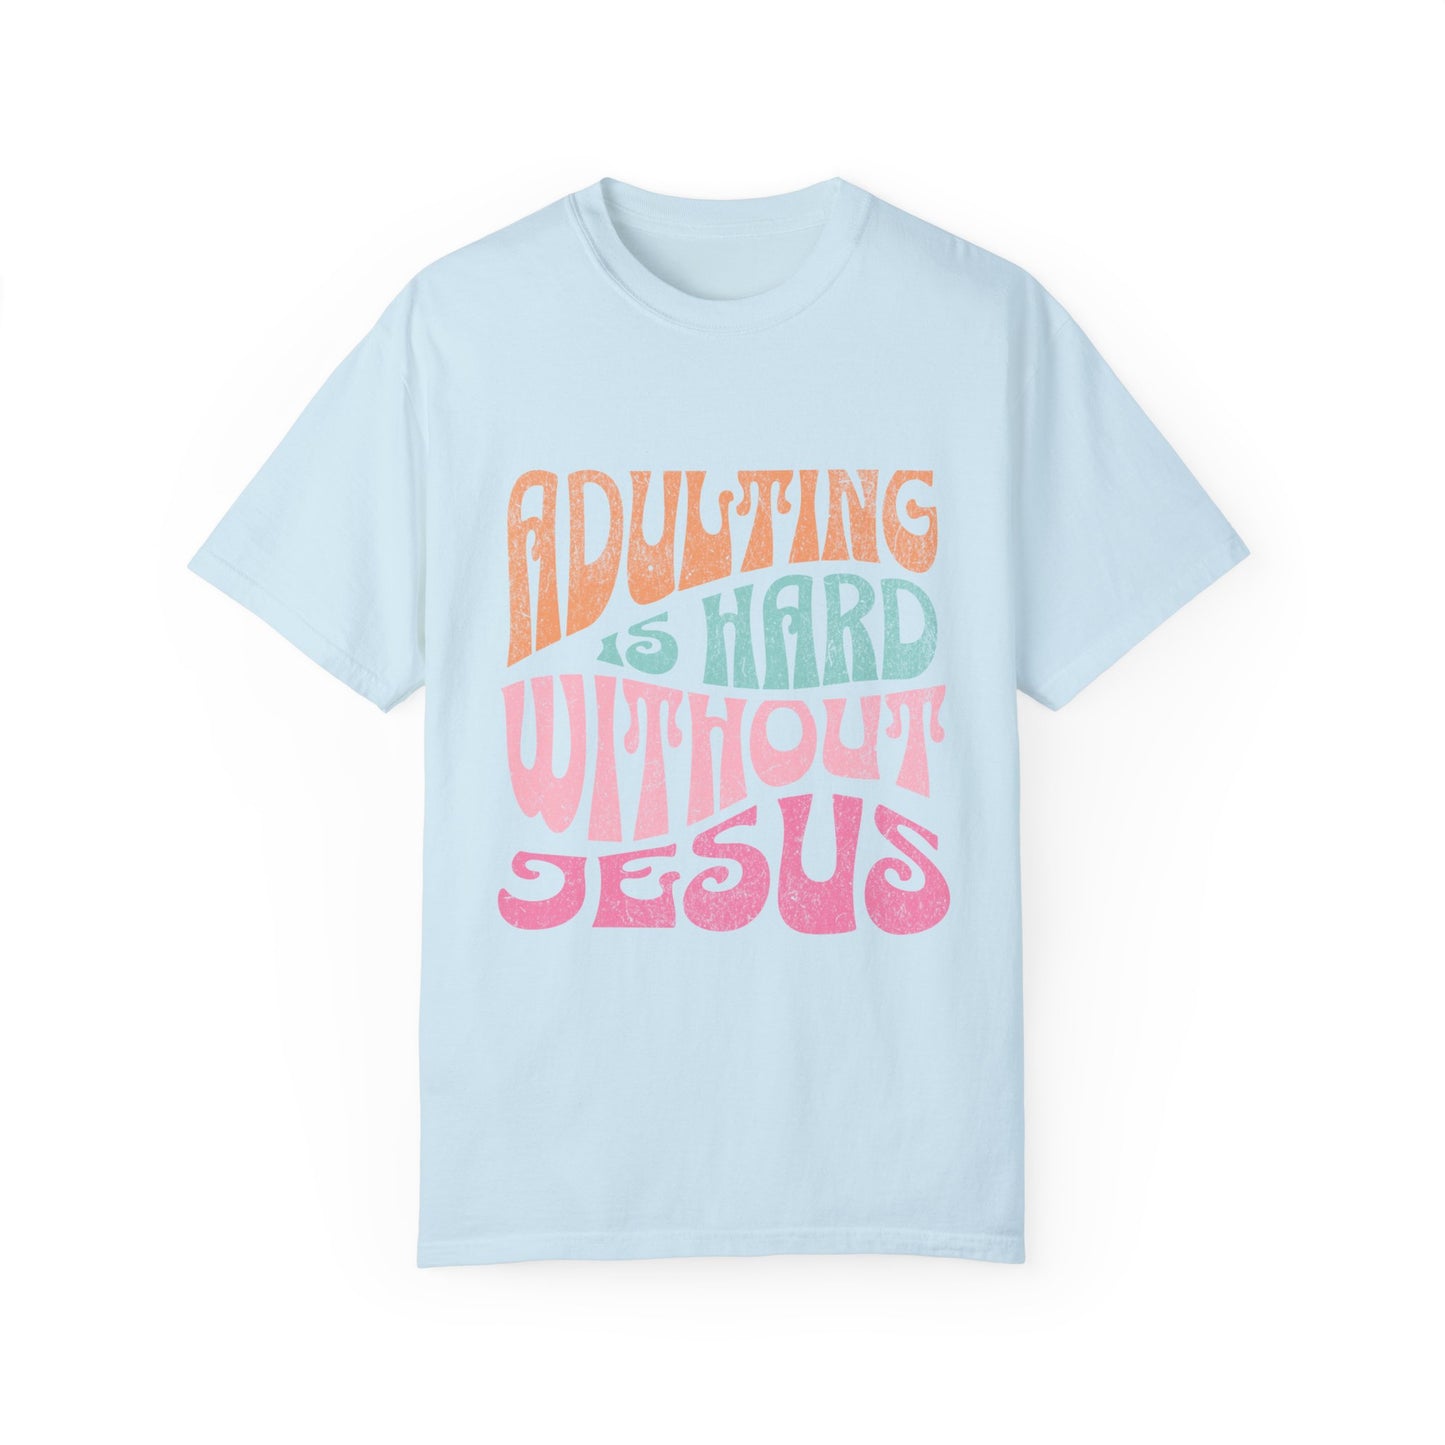 Adulting is hard without Jesus Unisex Garment-Dyed T-shirt